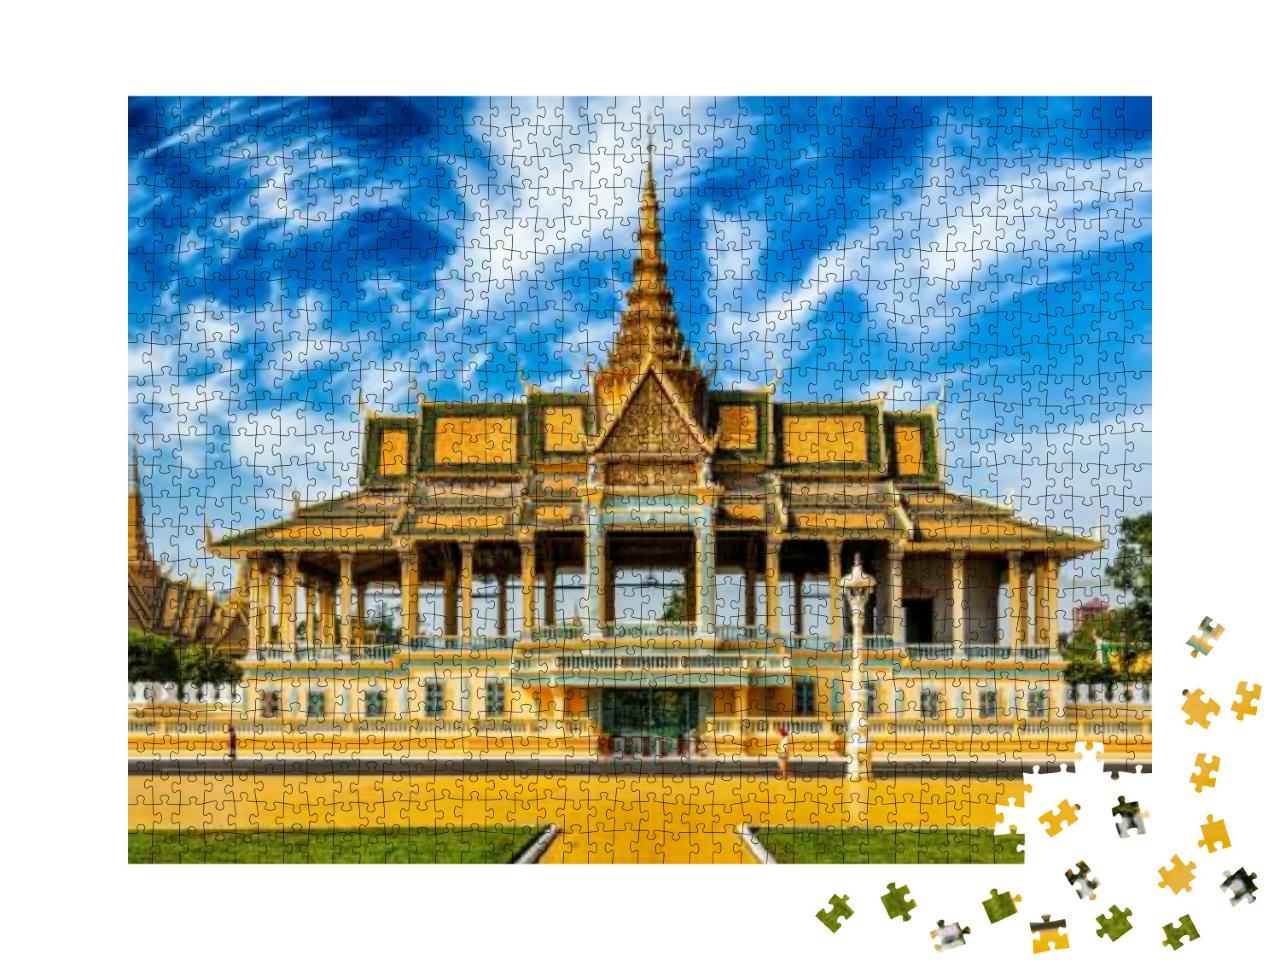 Phnom Penh Tourist Attraction & Famous Landmark - Panoram... Jigsaw Puzzle with 1000 pieces